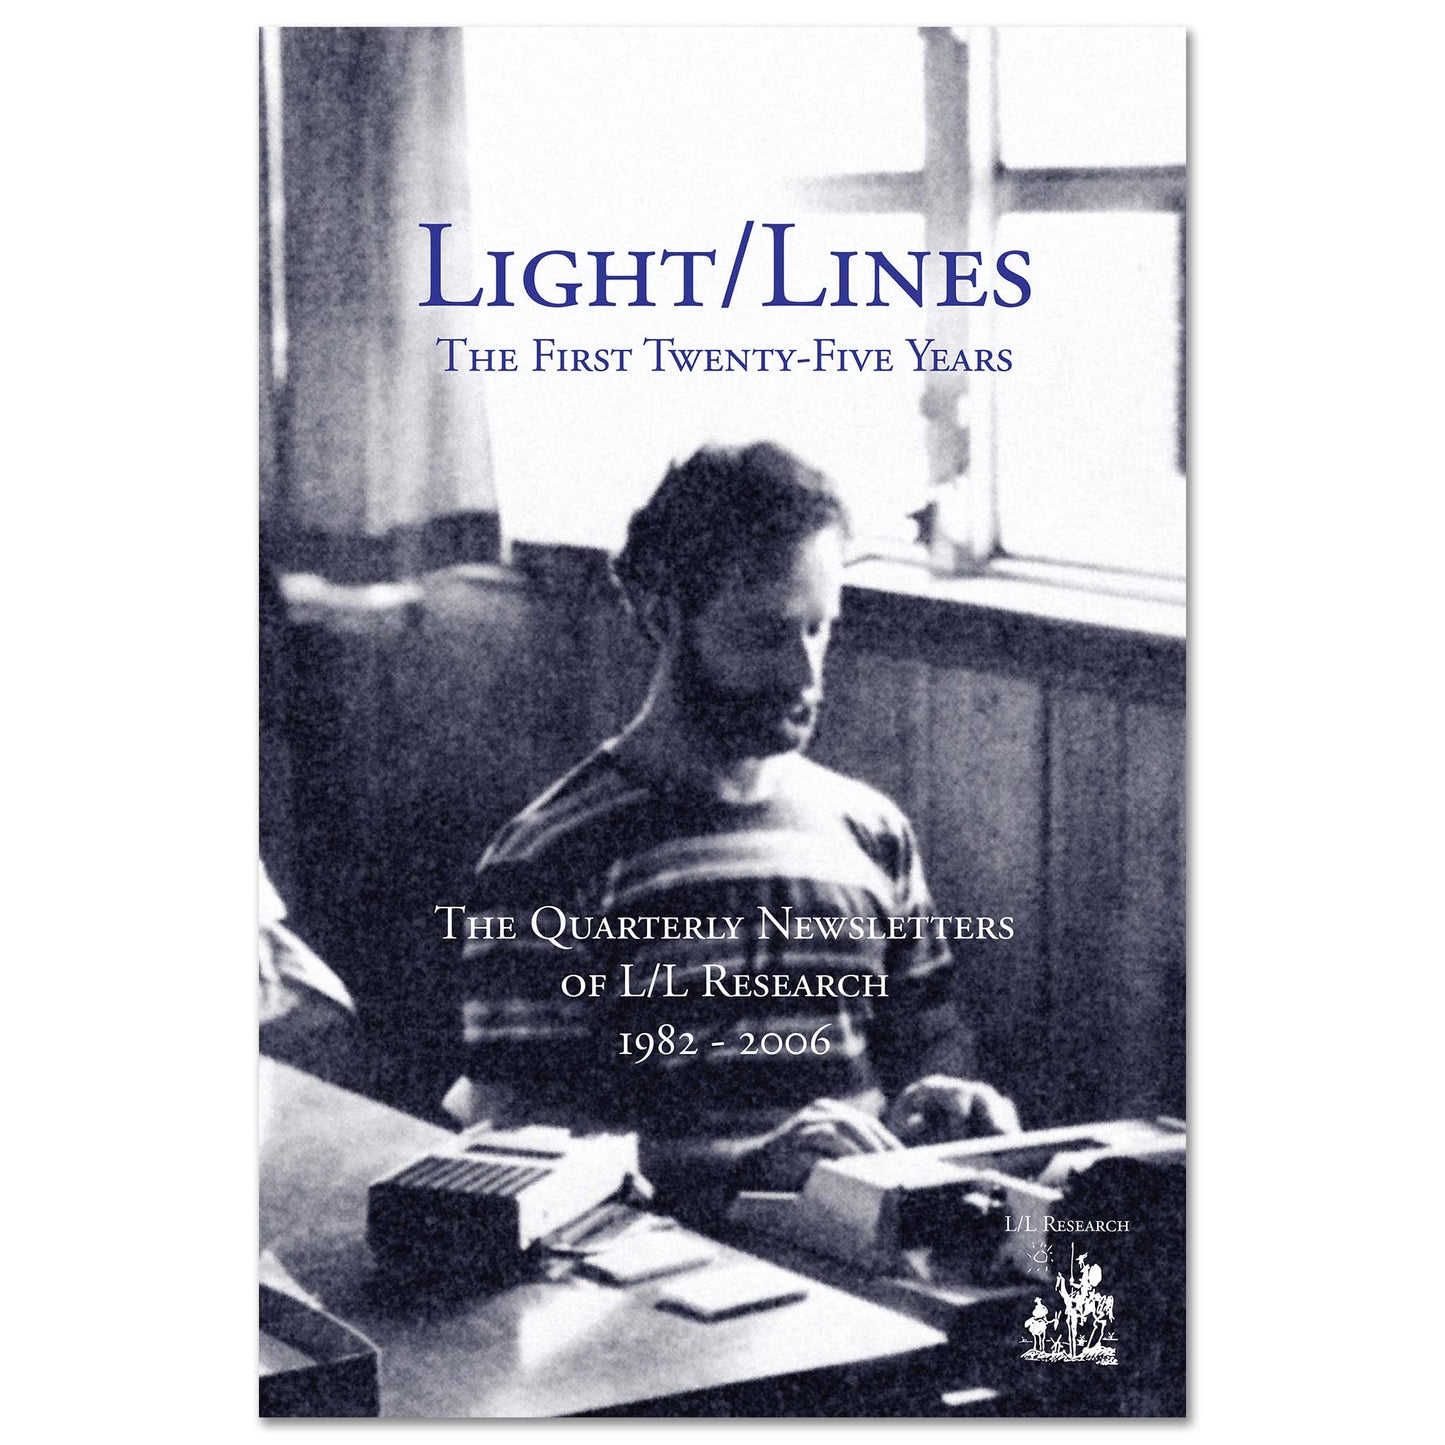 Light/Lines: The First Twenty-Five Years